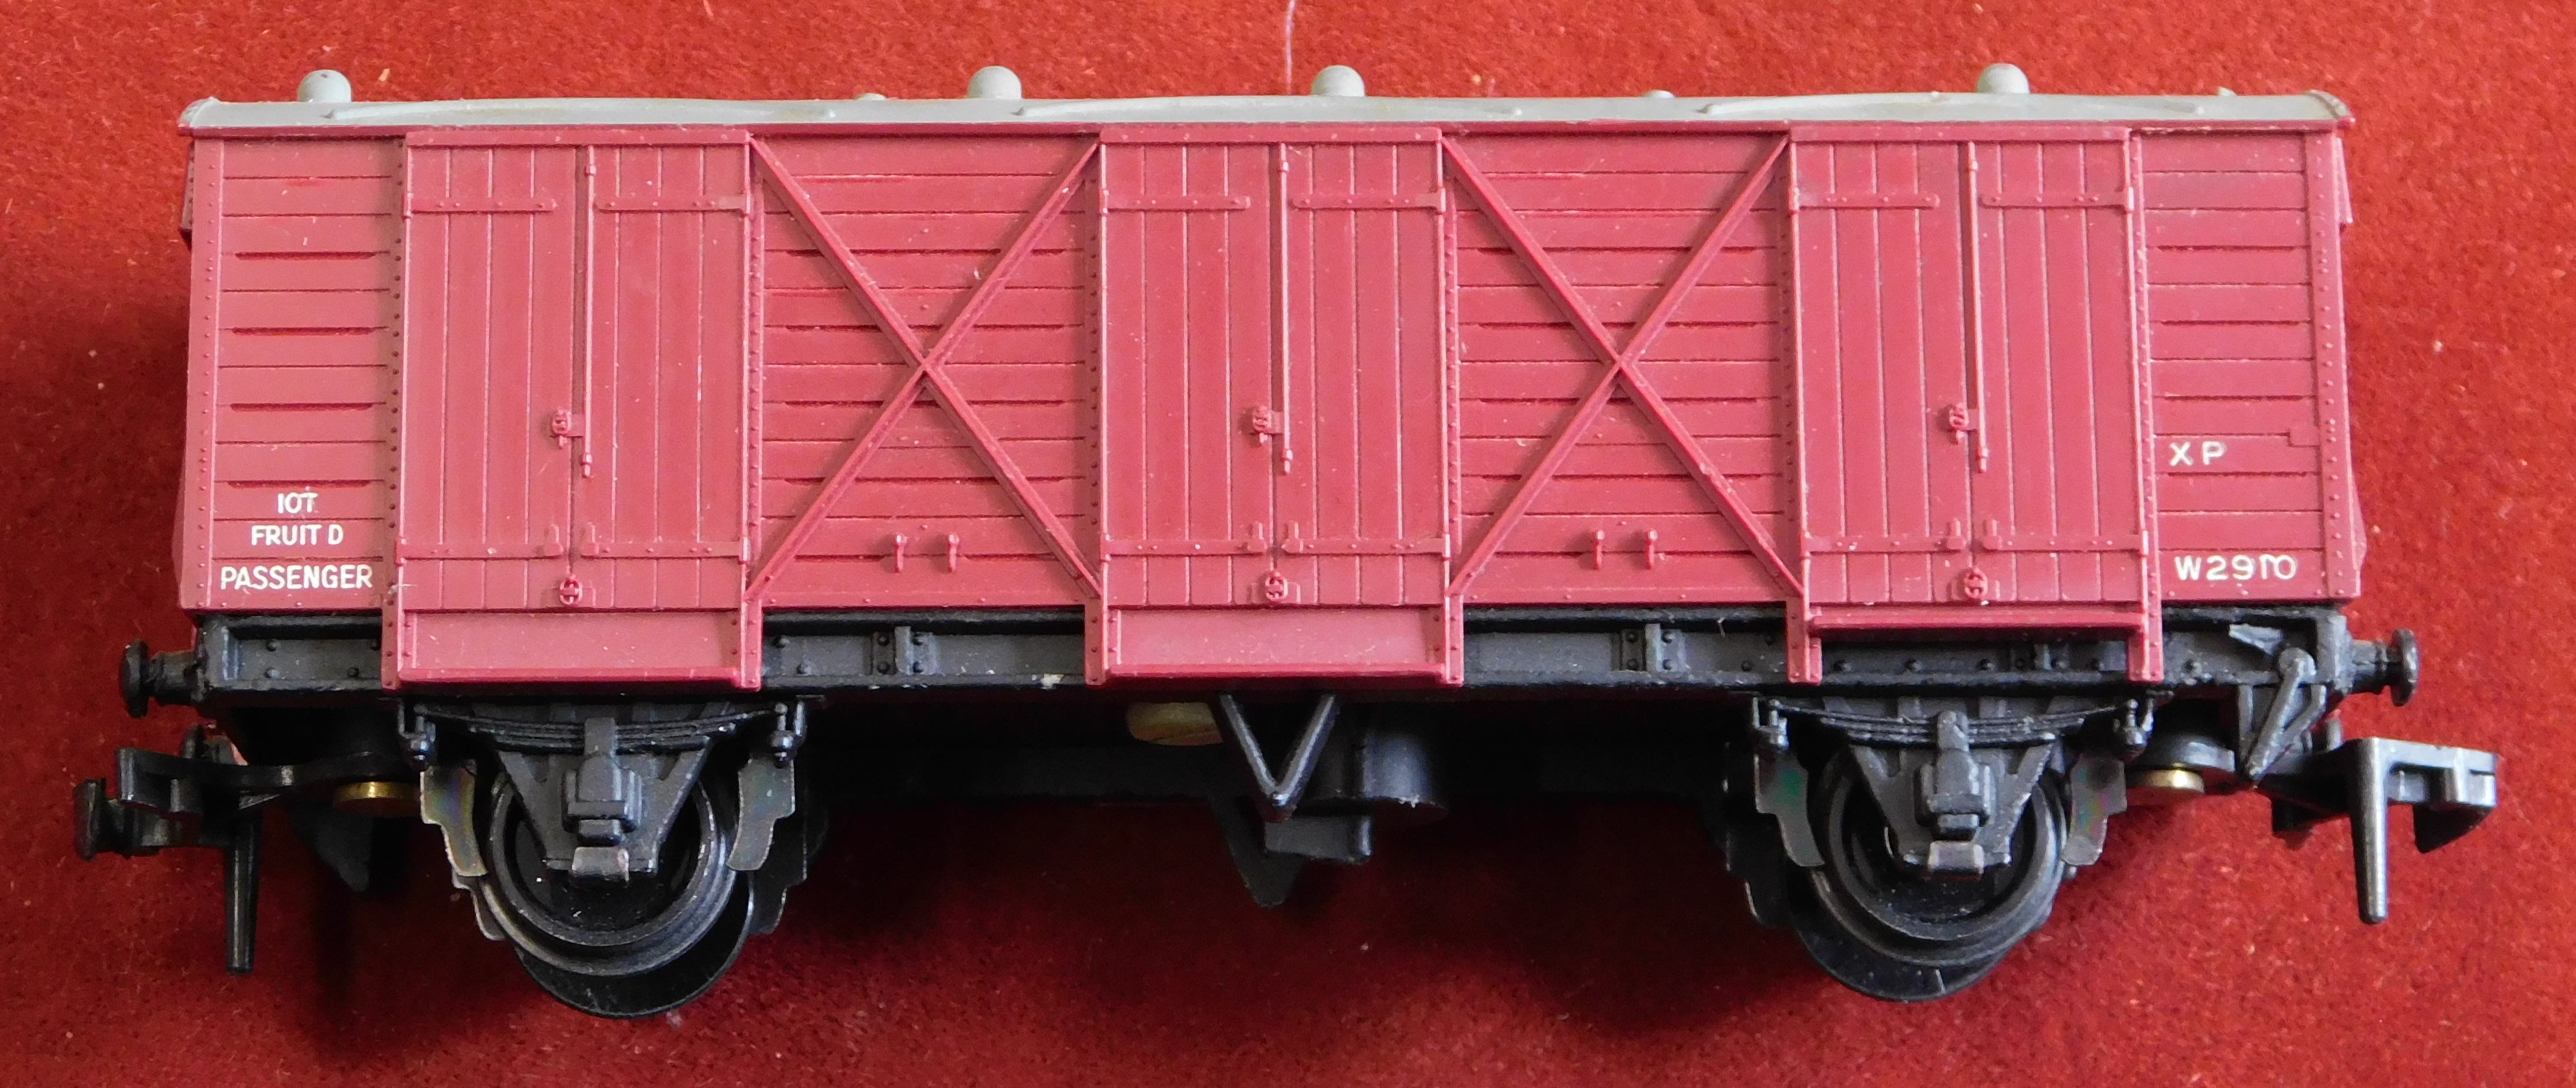 Hornby Dublo 'OO' Gauge 12x various coaches and wagons, pre-owned in box good condition - Image 6 of 9